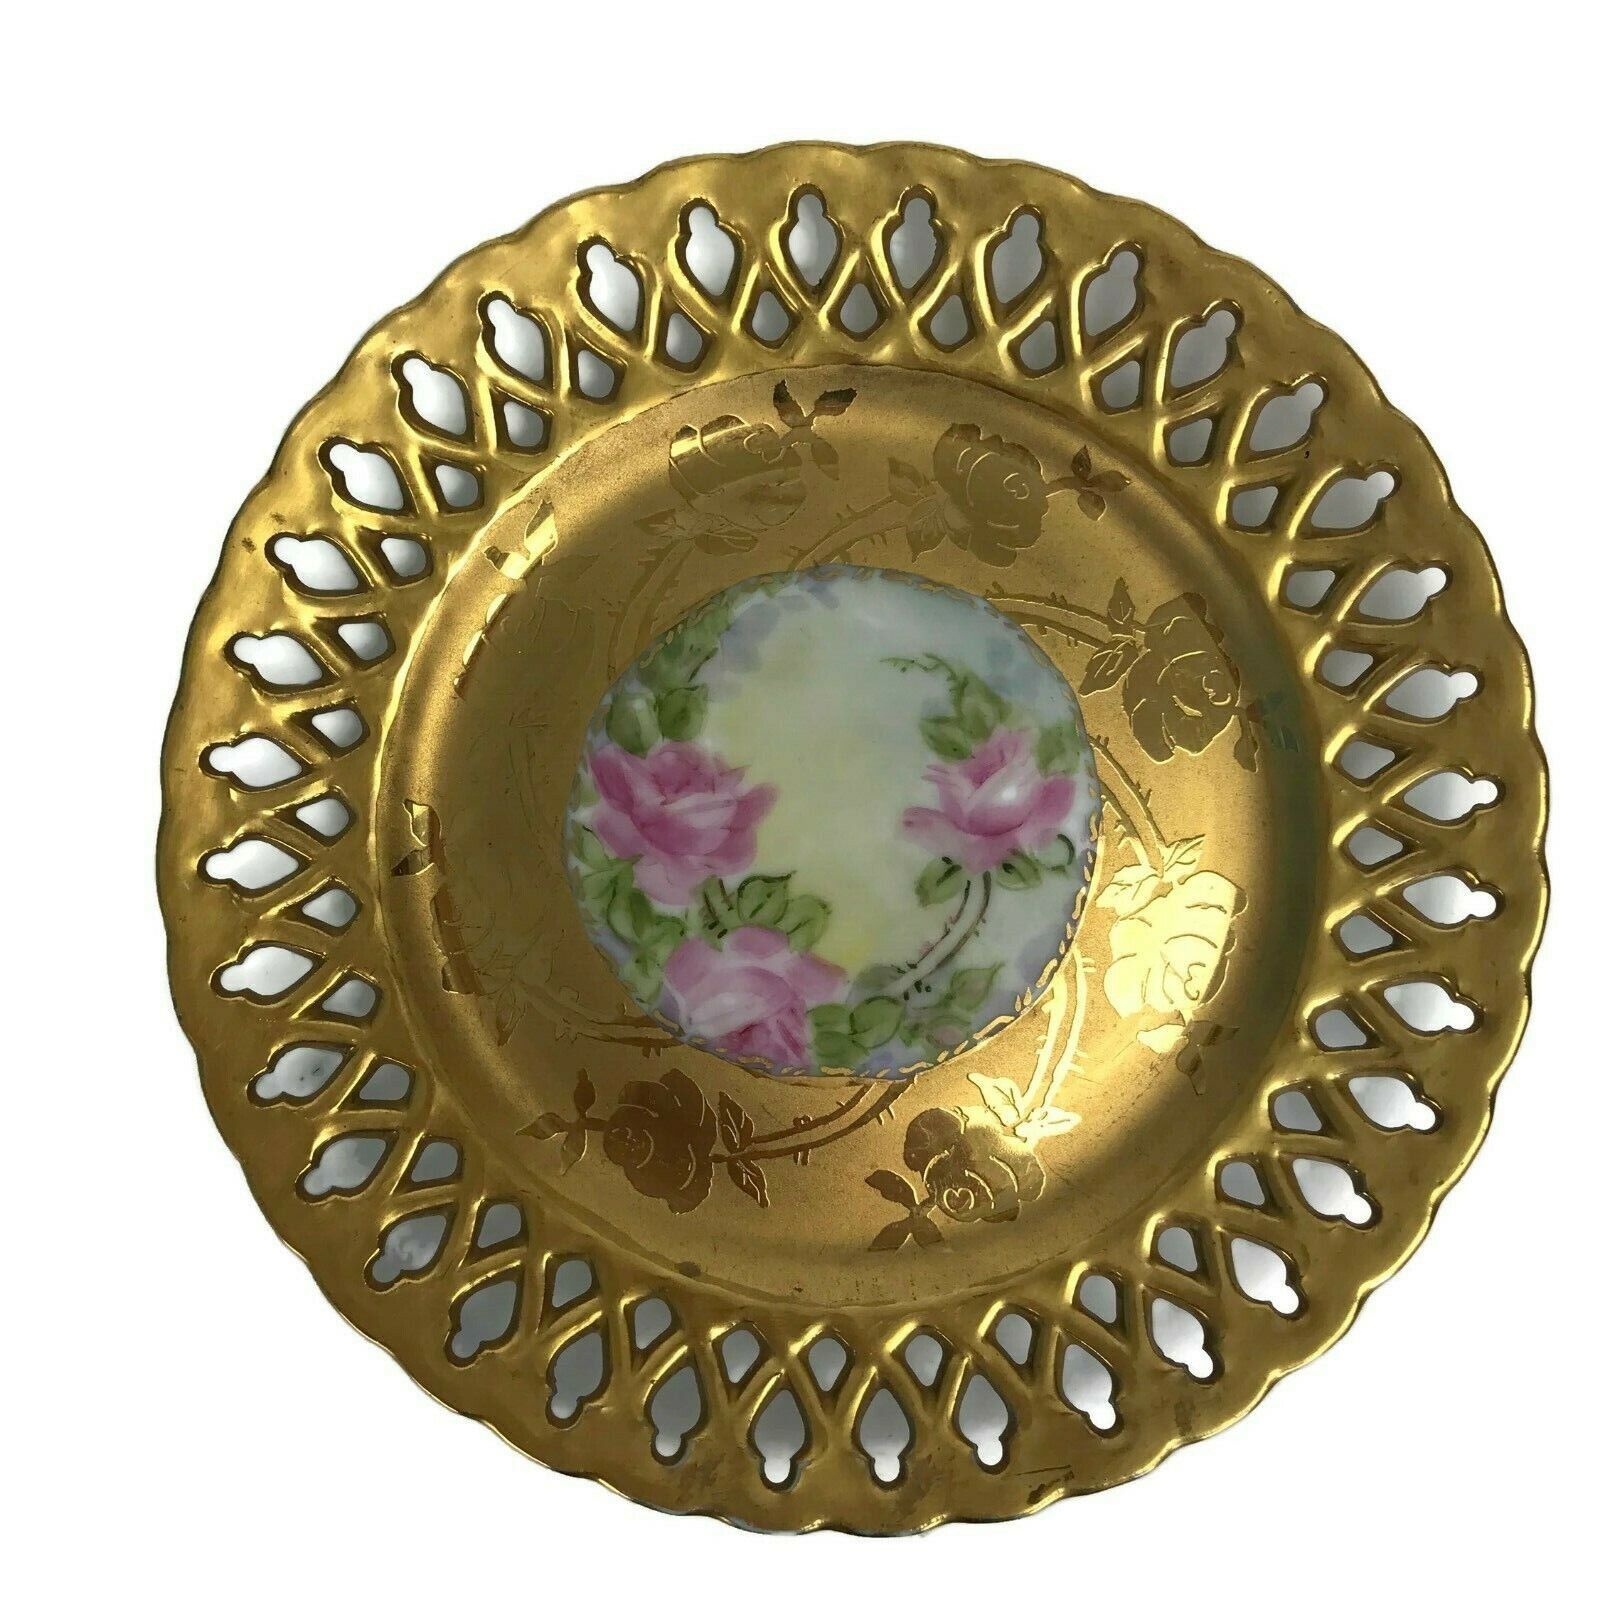 Primary image for Vintage Gold Encrusted Rose Handpainted Plate Pierced Reticulated Border Edge MK